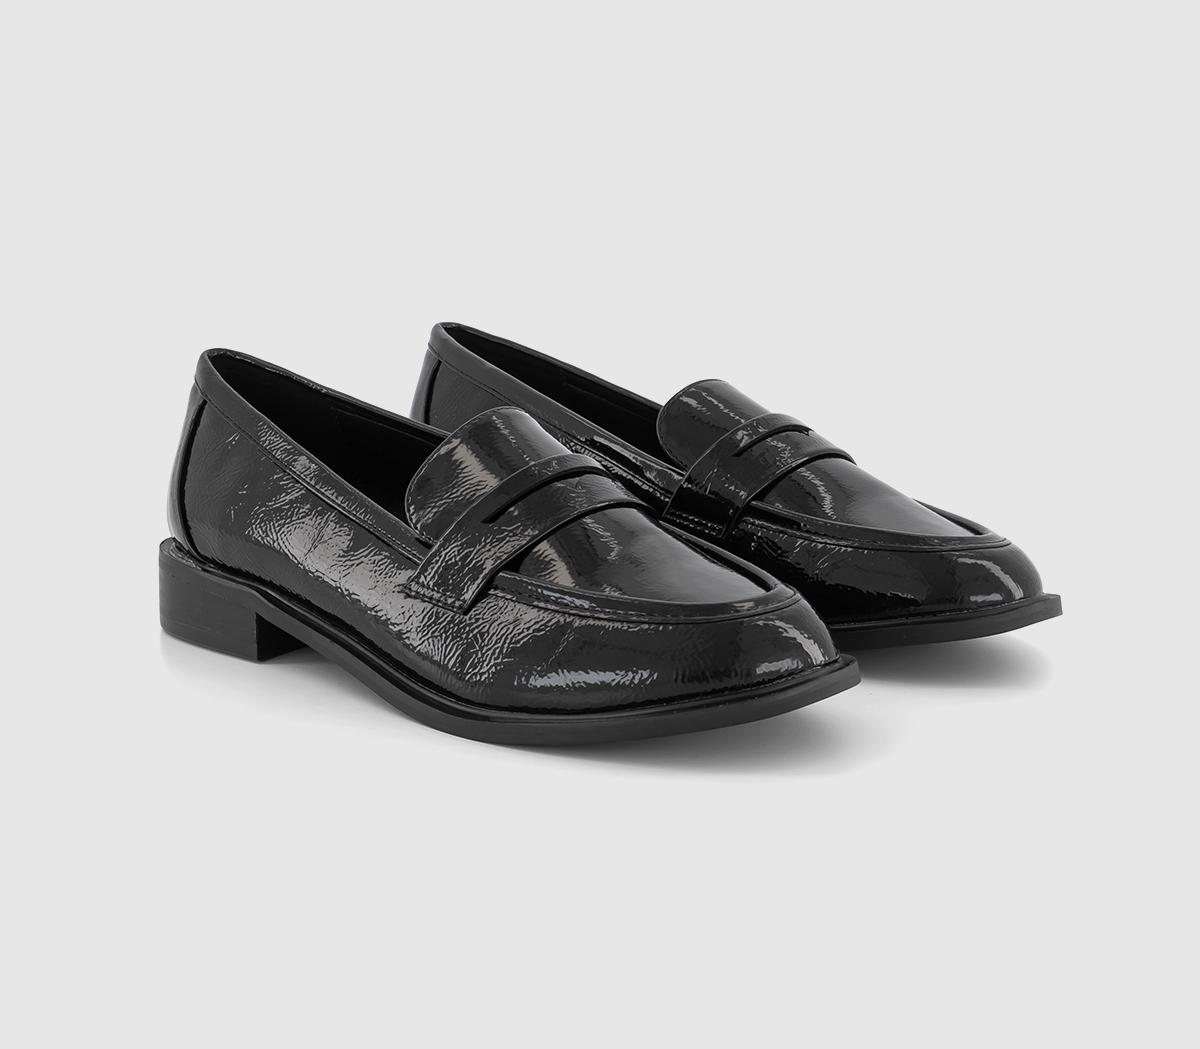 OFFICE Flaming Penny Loafers Black Patent, 6